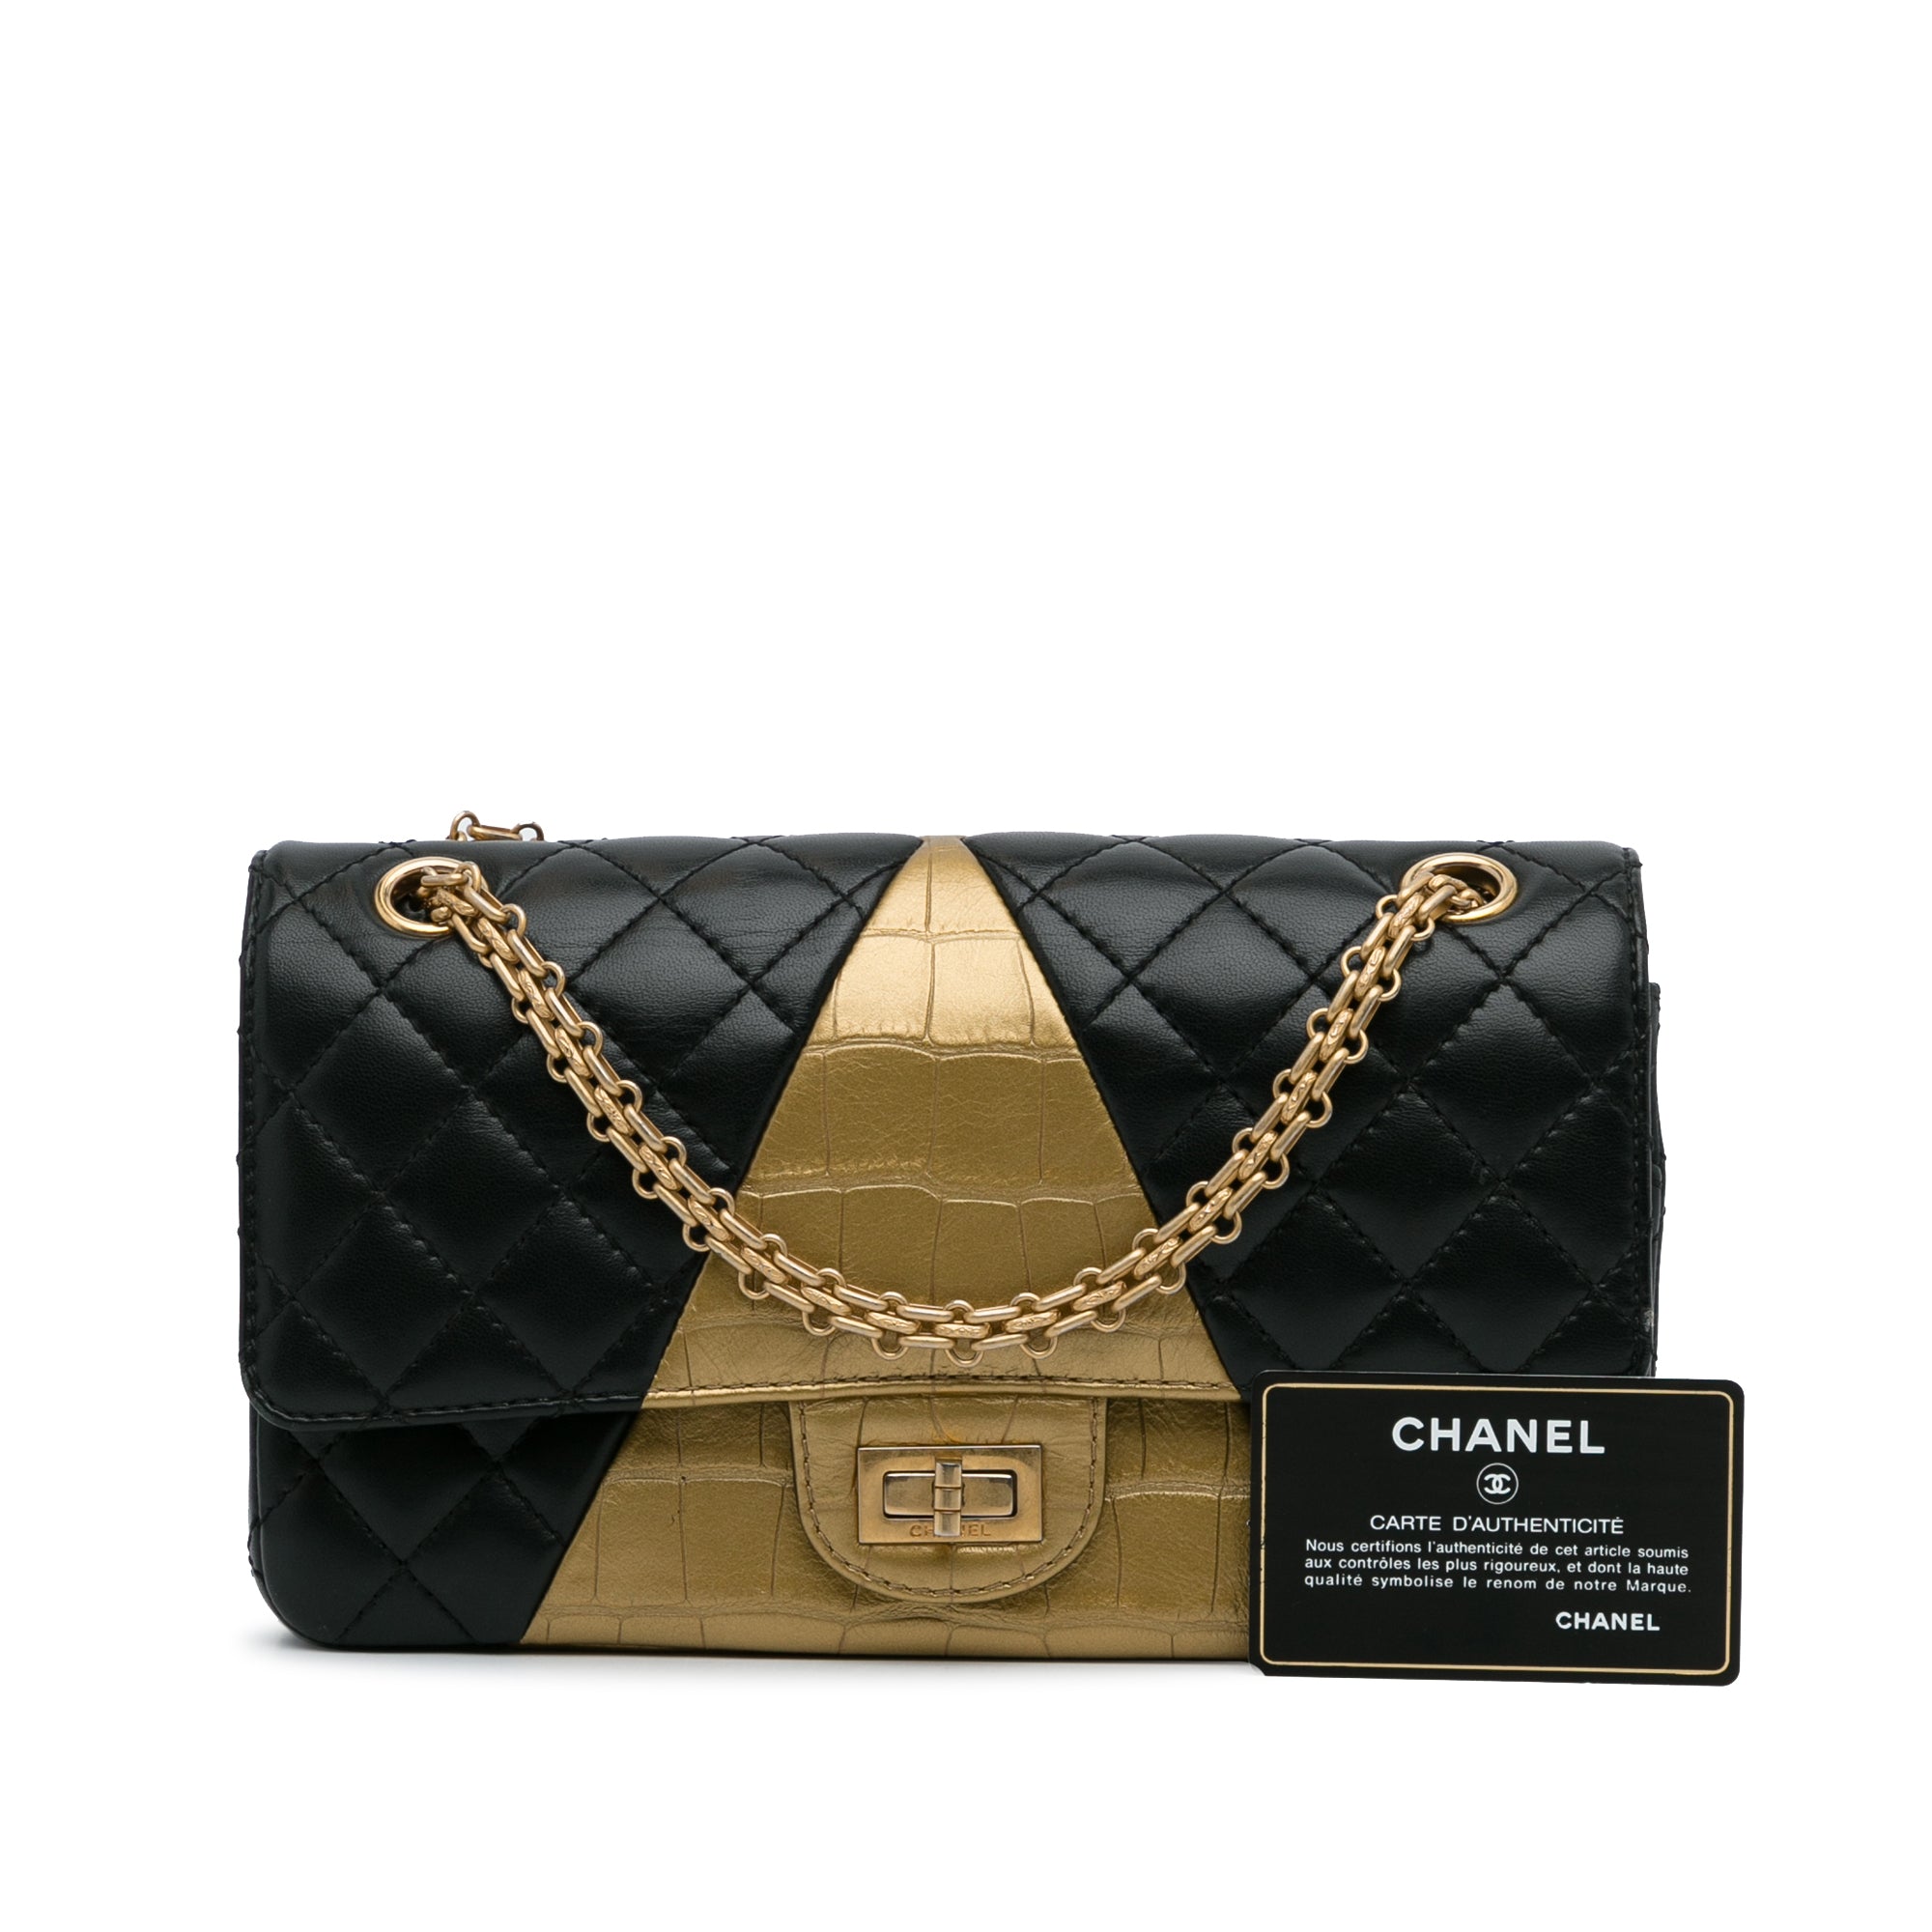 Sold at Auction: CHANEL Black Lambskin Scales Camera Bag, Box ITALY